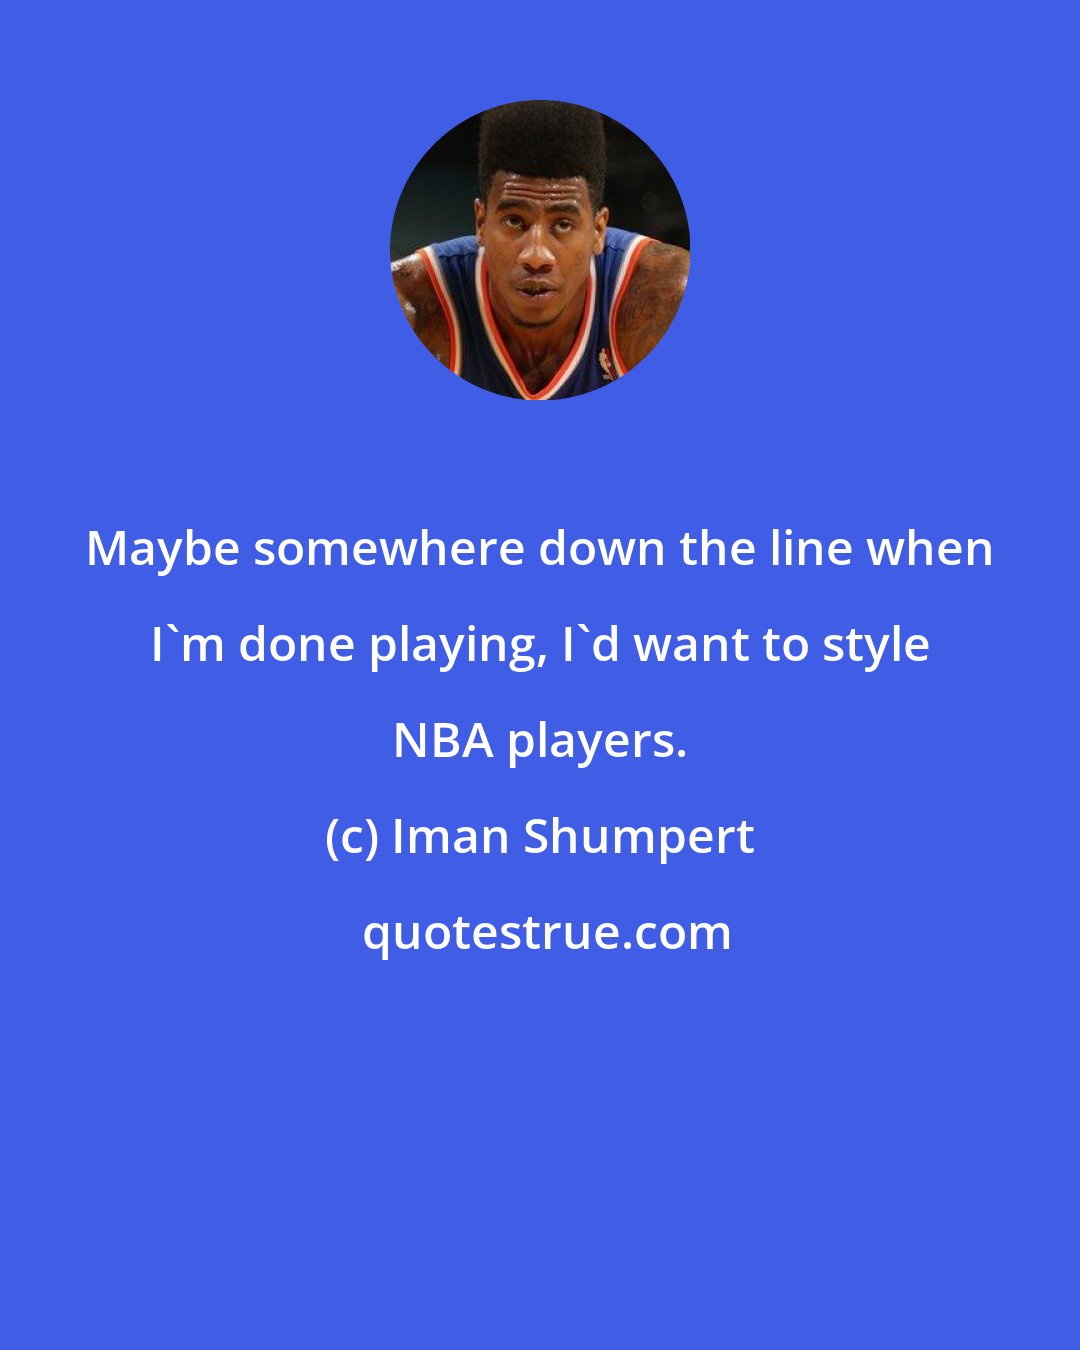 Iman Shumpert: Maybe somewhere down the line when I'm done playing, I'd want to style NBA players.